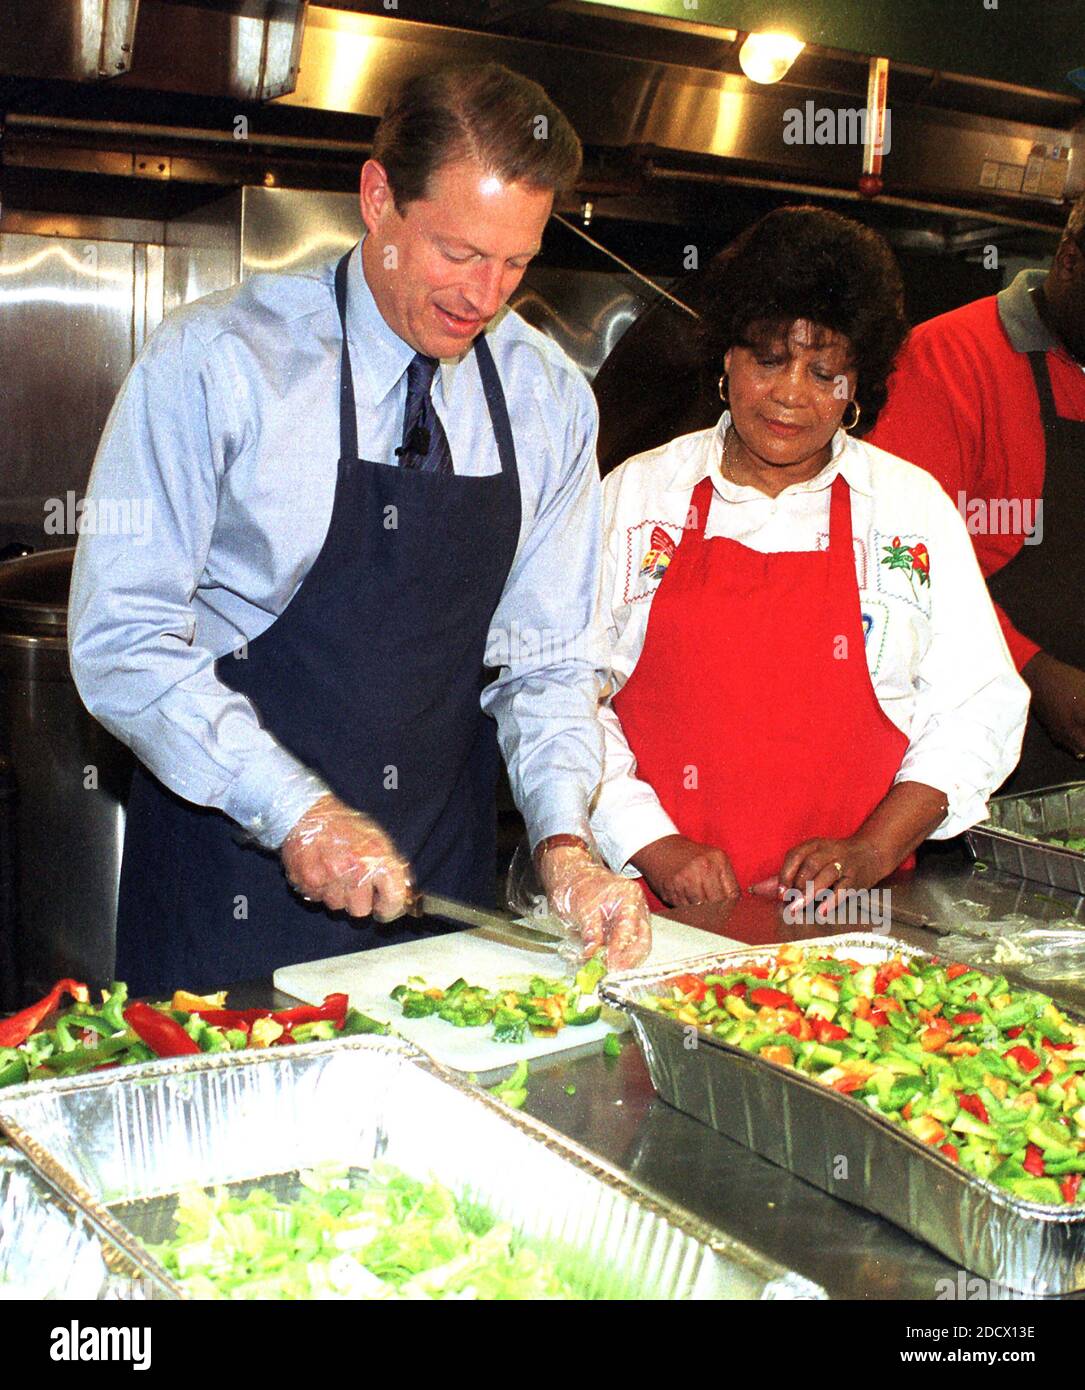 United States Vice President Al Gore prepares sandwiches at Martha's Table, a shelter that provides meals to the homeless in Washington, D.C. on 15 October, 1999. Olivia Ivy, Director of Operations at Martha's Table, looks on.Credit: Ron Sachs / CNP/ABACAPRESS.COM Stock Photo